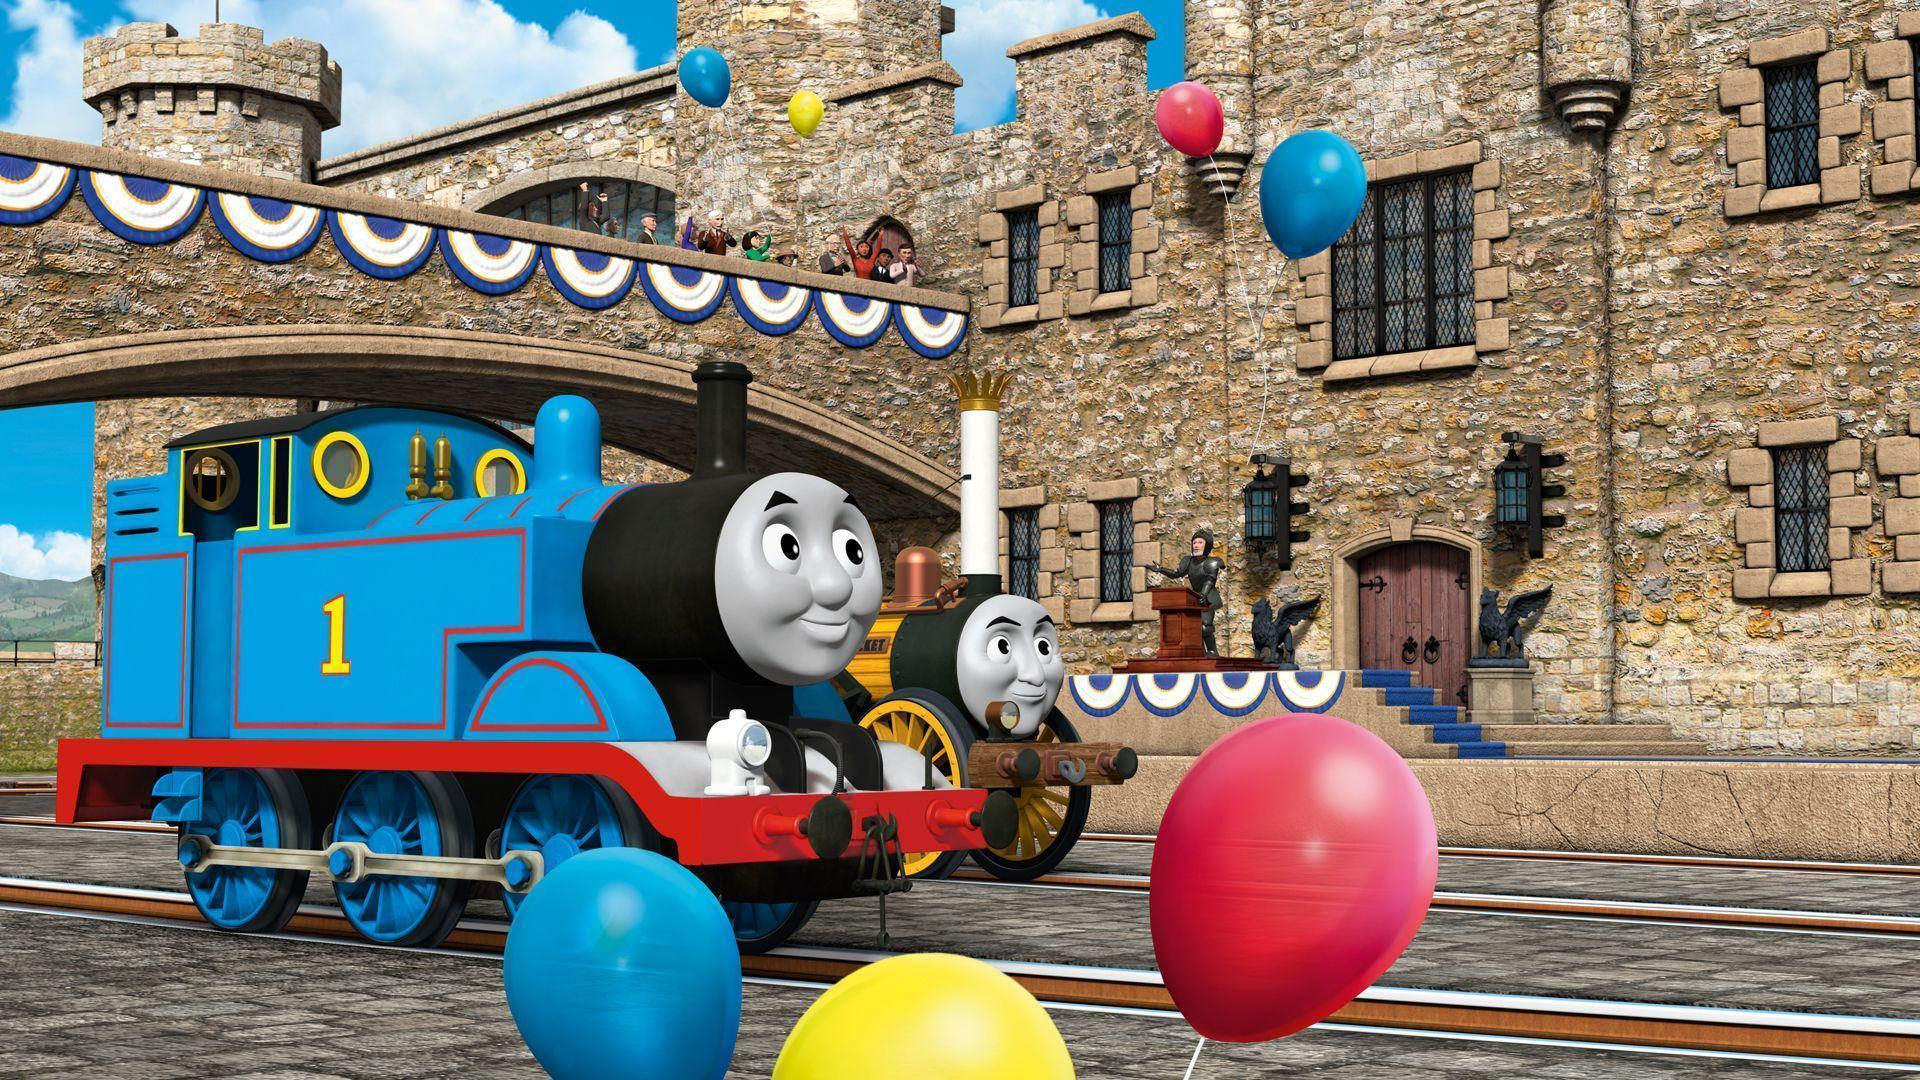 Thomas And Friends Wallpaper HD, Full HDQ Thomas And Friends HD